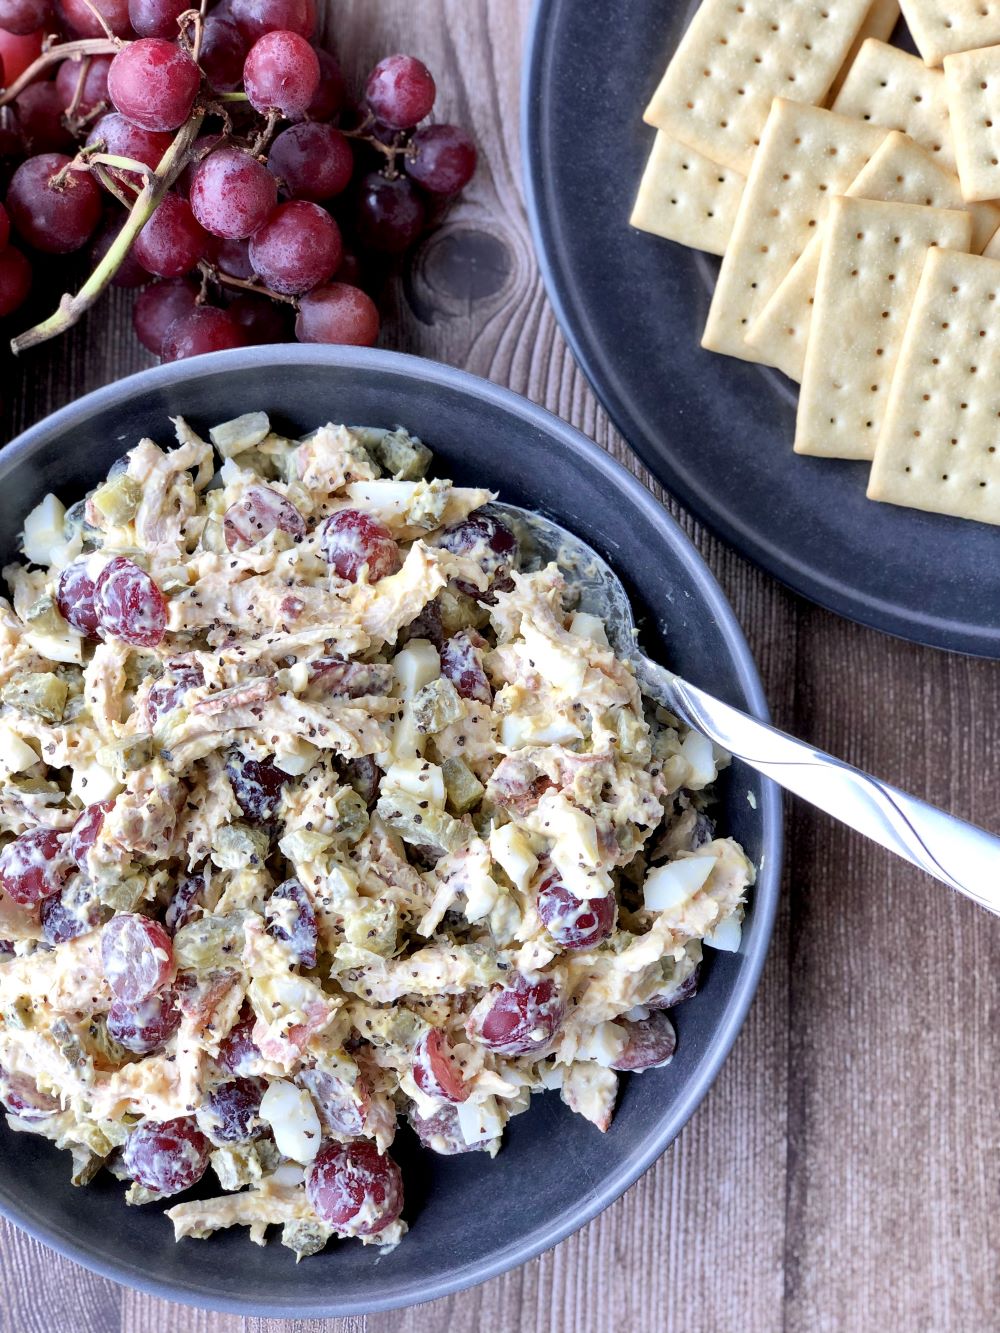 Easy Chicken Salad with Bacon